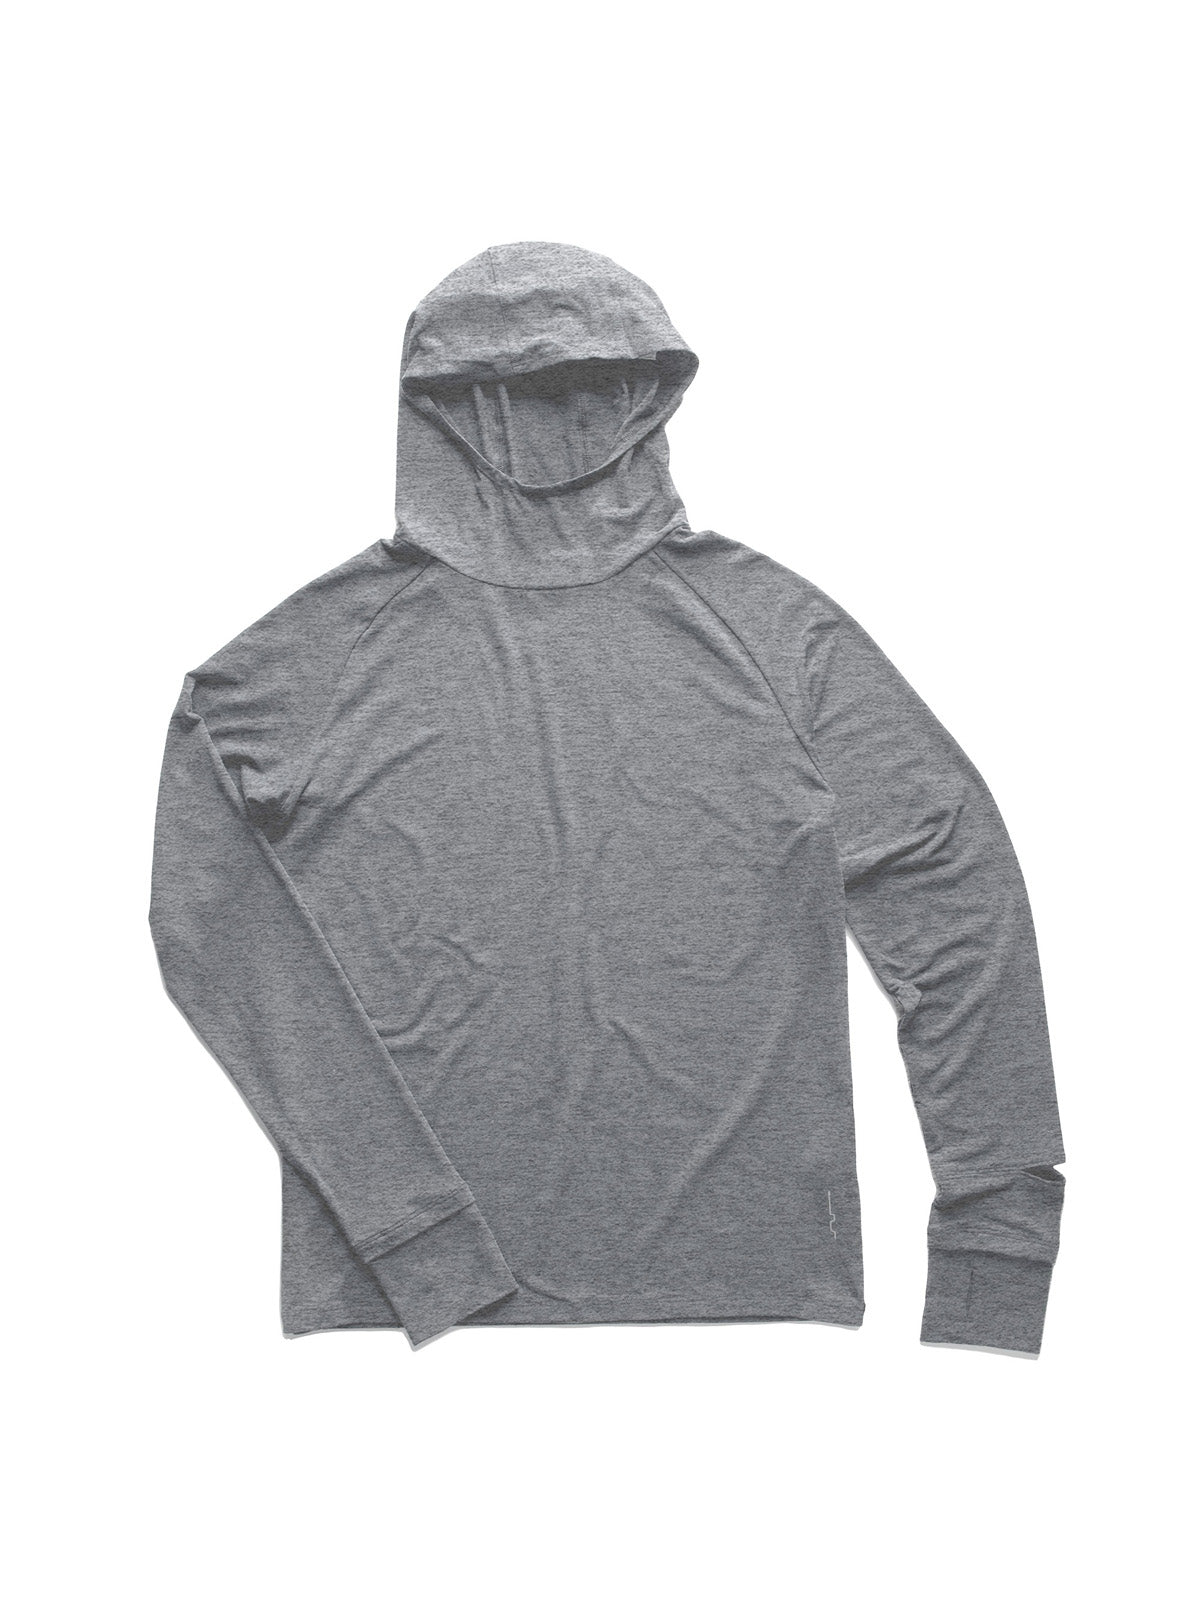 Pyrenees T19 Hooded Long Sleeve Shirt | PATH projects